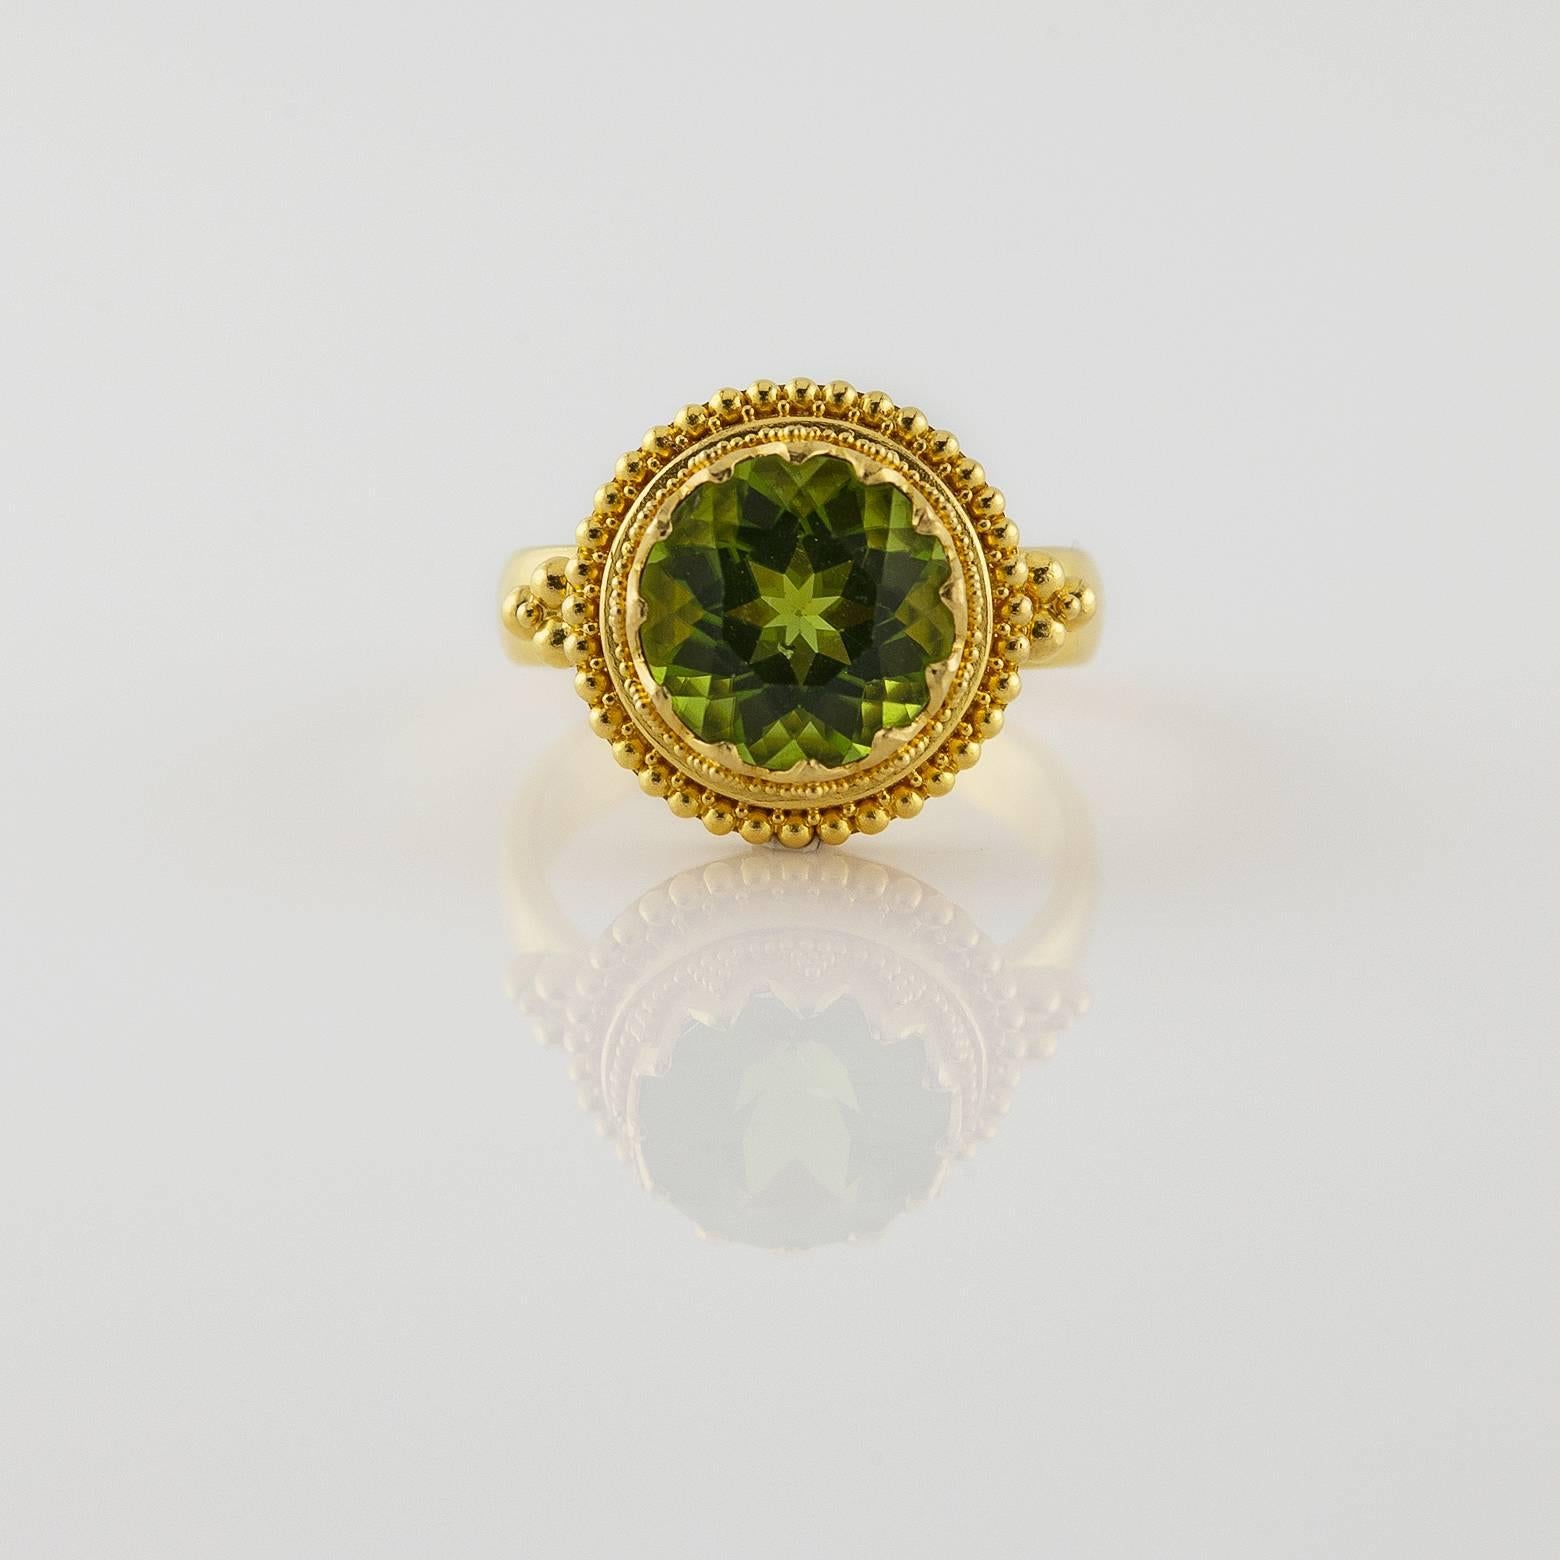 This stunning and intricately designed ring is full of detail and character. The quality of the stone is diivne and sparkles in every direction. It's classy and modern with an ancient and antique feel to it. Approximately size 6.75